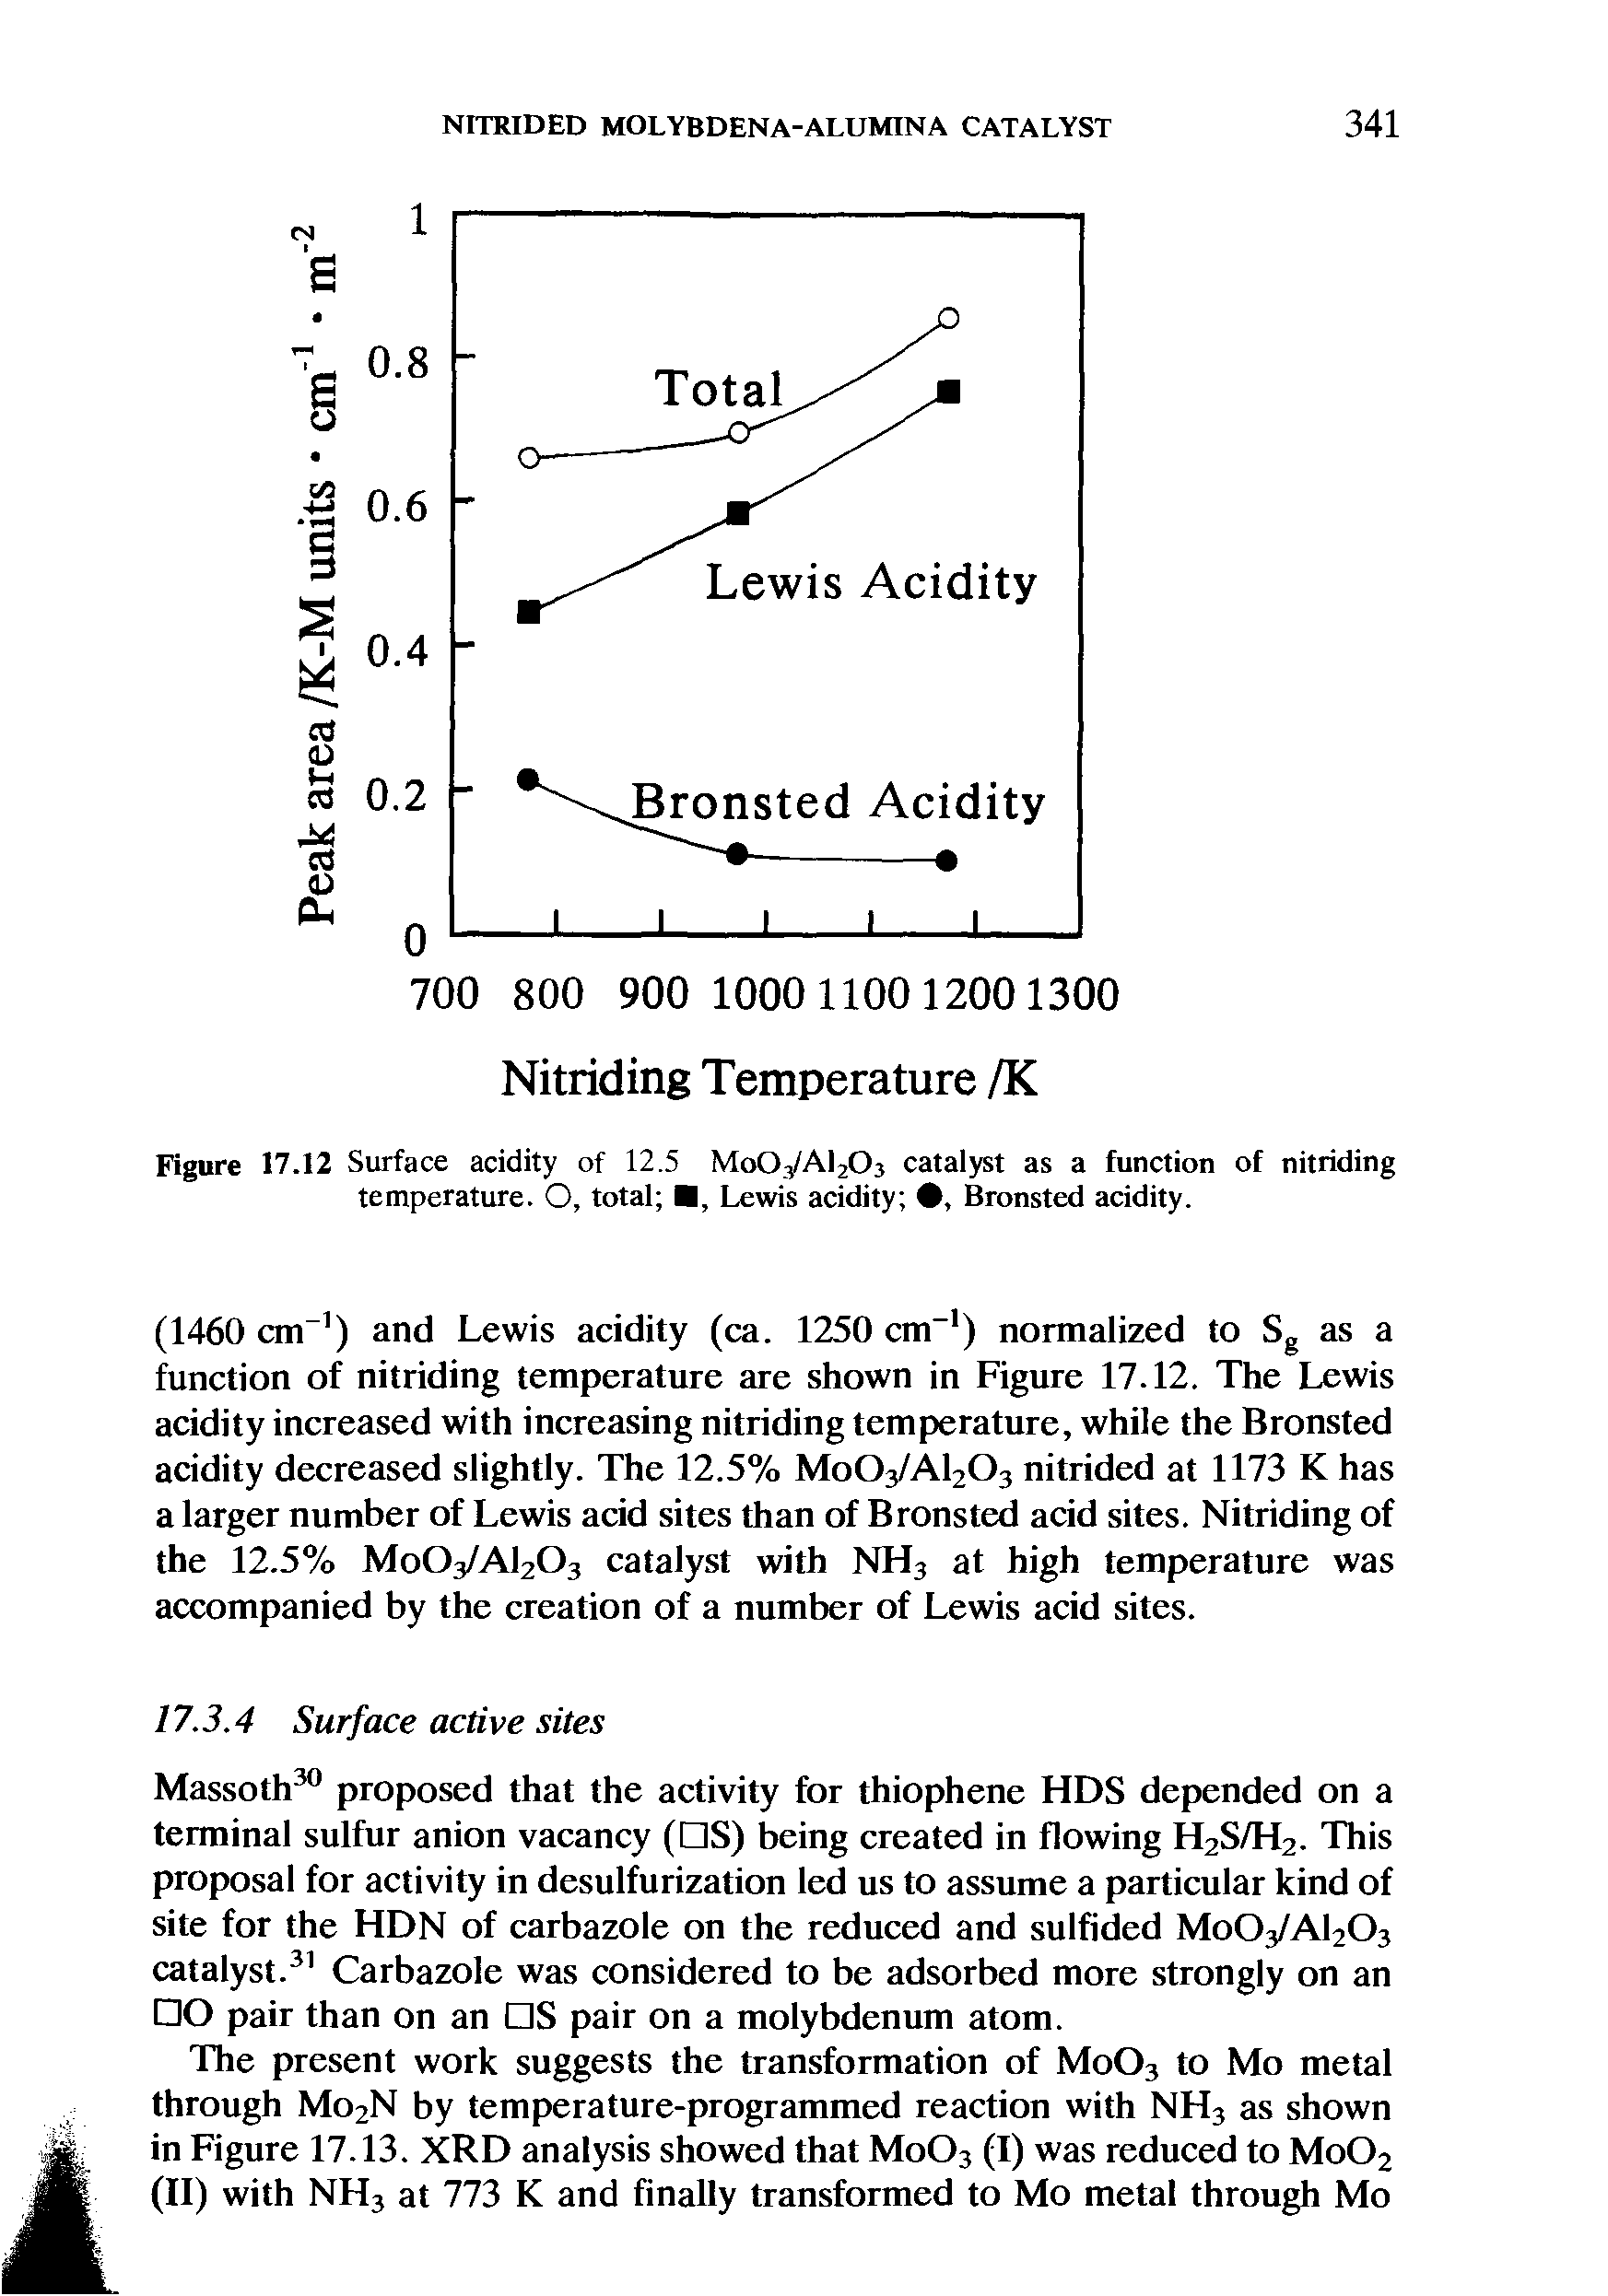 Figure 17.12 Surface acidity of 12.5 M0O3/AI2O3 catalyst as a function of nitriding temperature. O, total , Lewis acidity , Bronsted acidity.